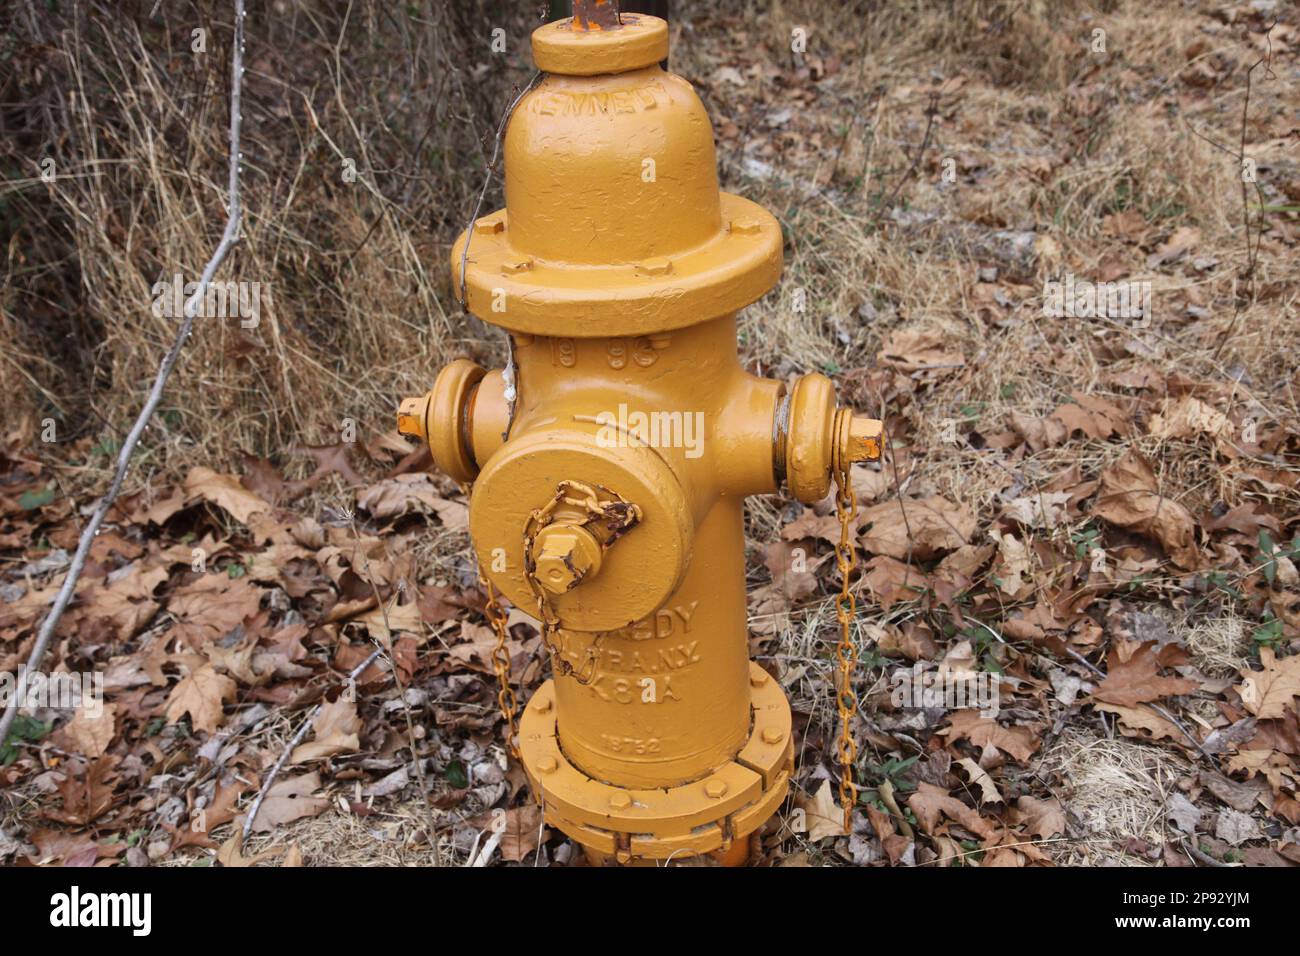 A orange colored fire hydrant sitting amongst the fallen brown leaves on a winter day. Stock Photo